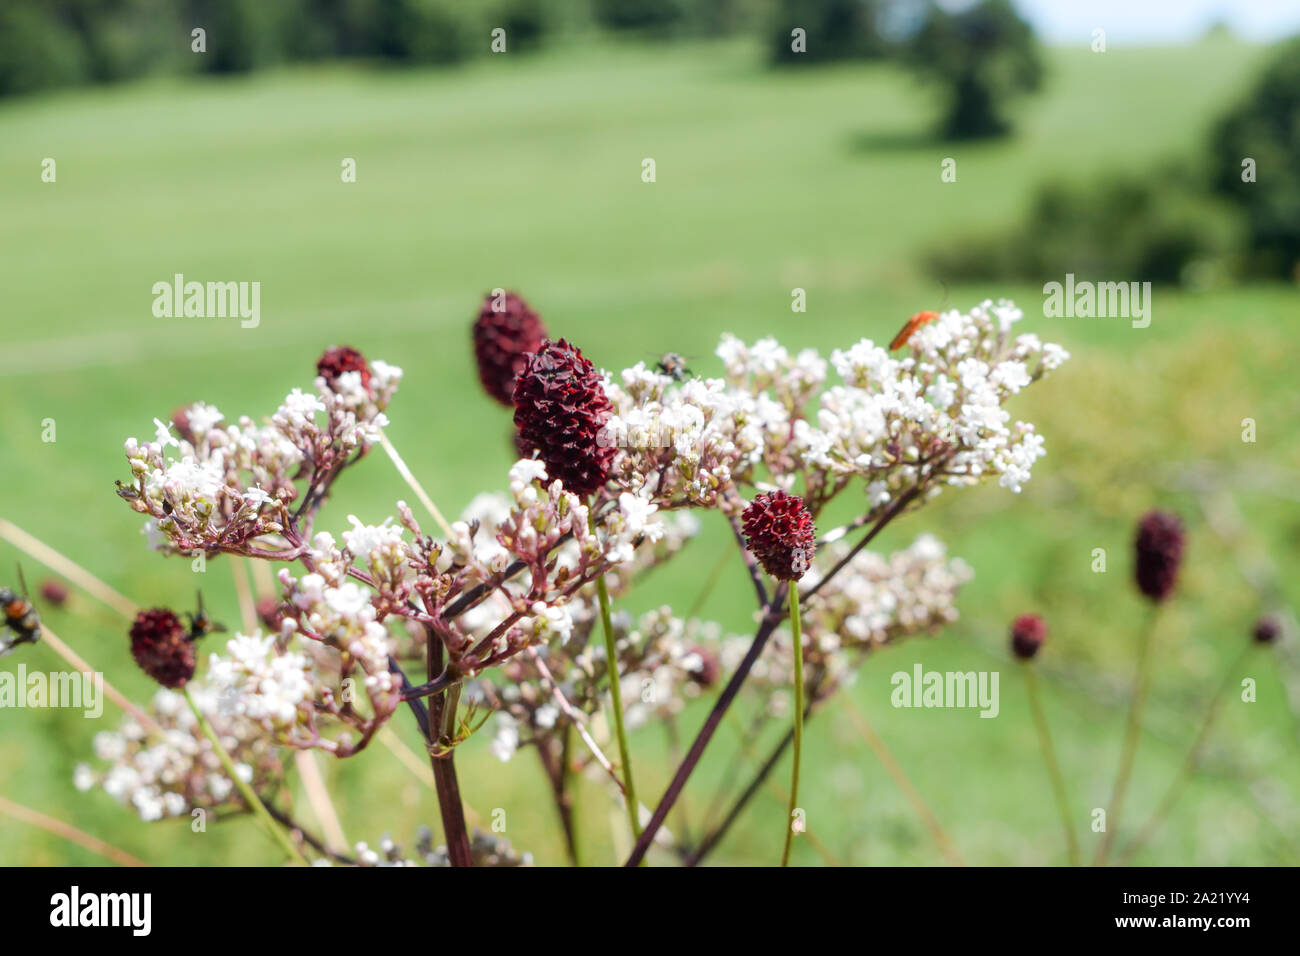 Great burnet (Sanguisorba officinalis) and Burnet-saxifrage (Pimpinella saxifraga) with field in background. Stock Photo